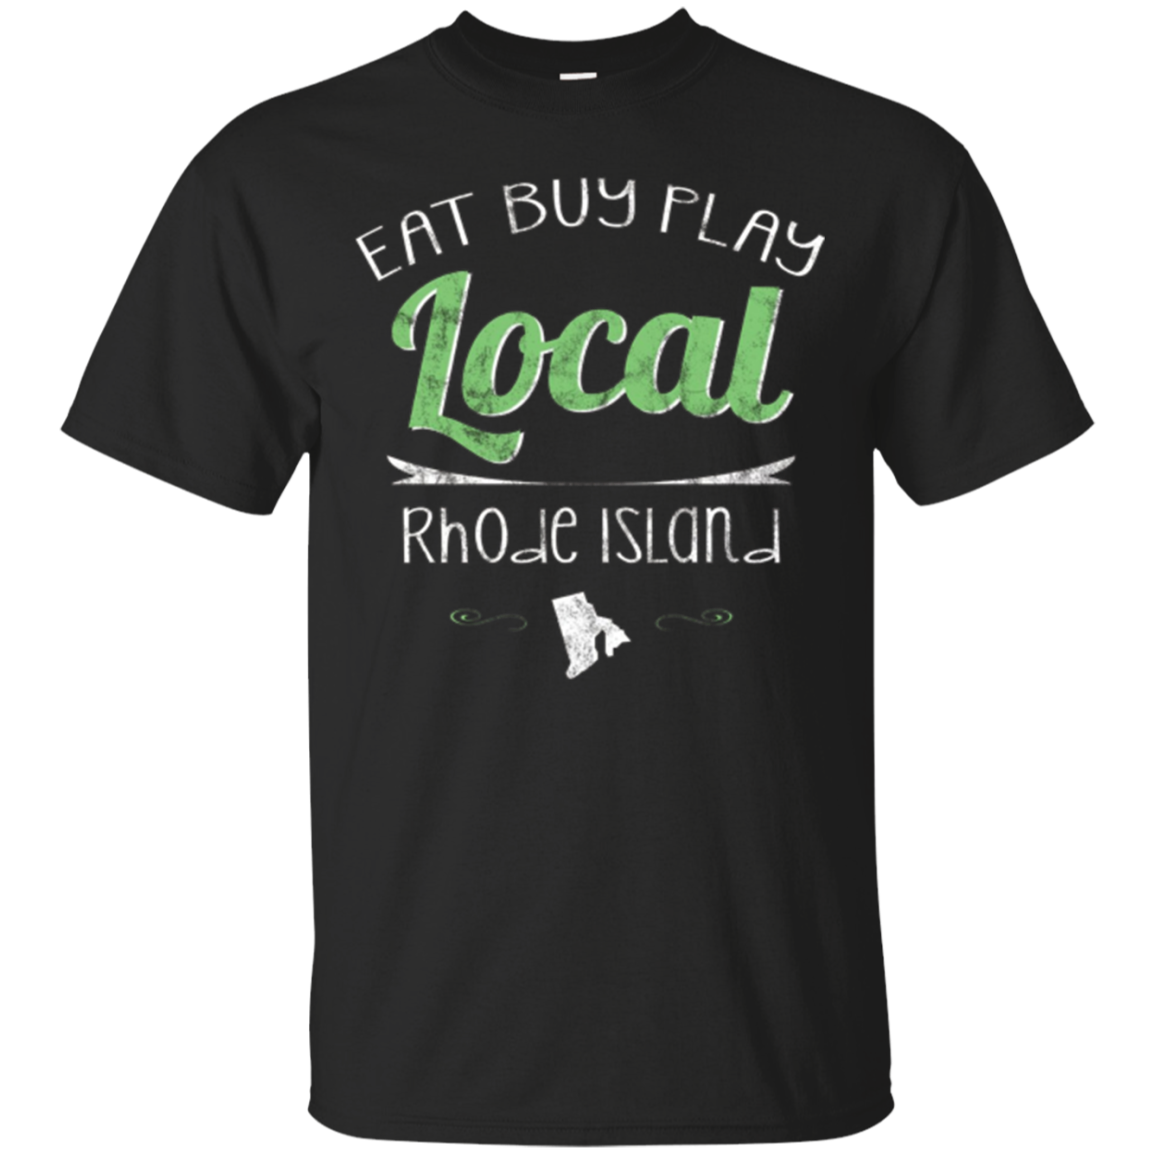 Eat Buy Play Local Rhode Island Distressed T-shirt